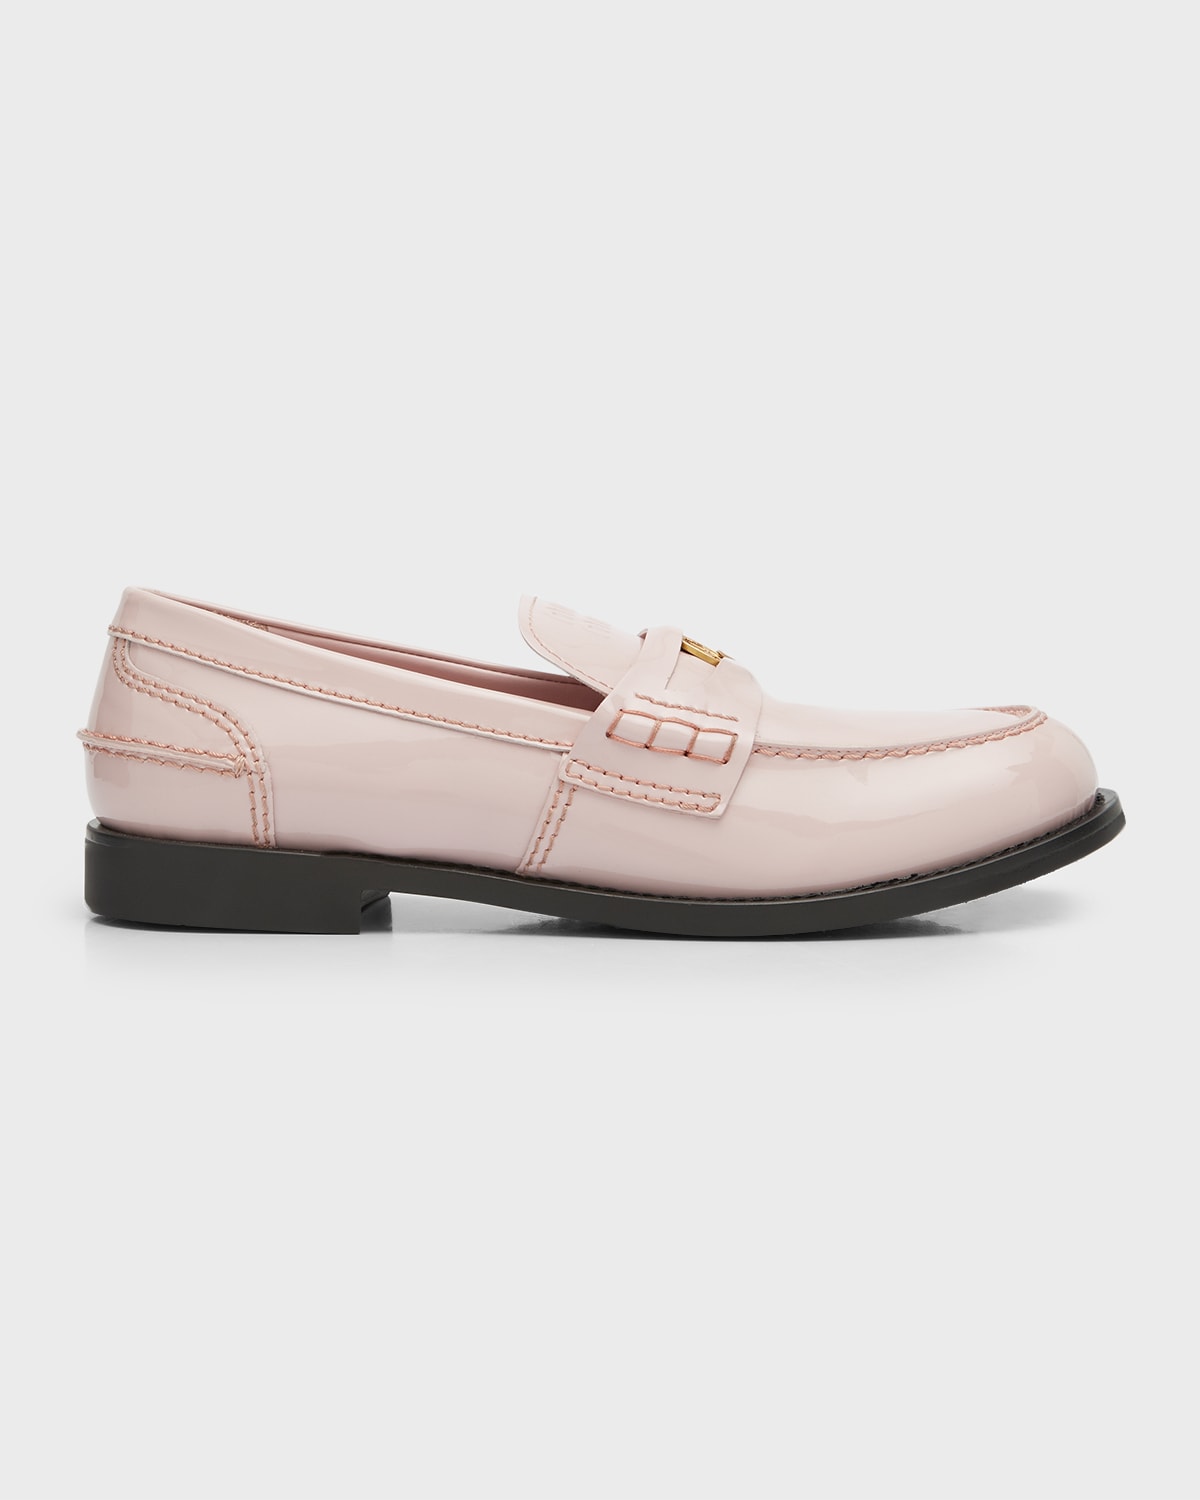 MIU MIU PATENT LEATHER COIN PENNY LOAFERS